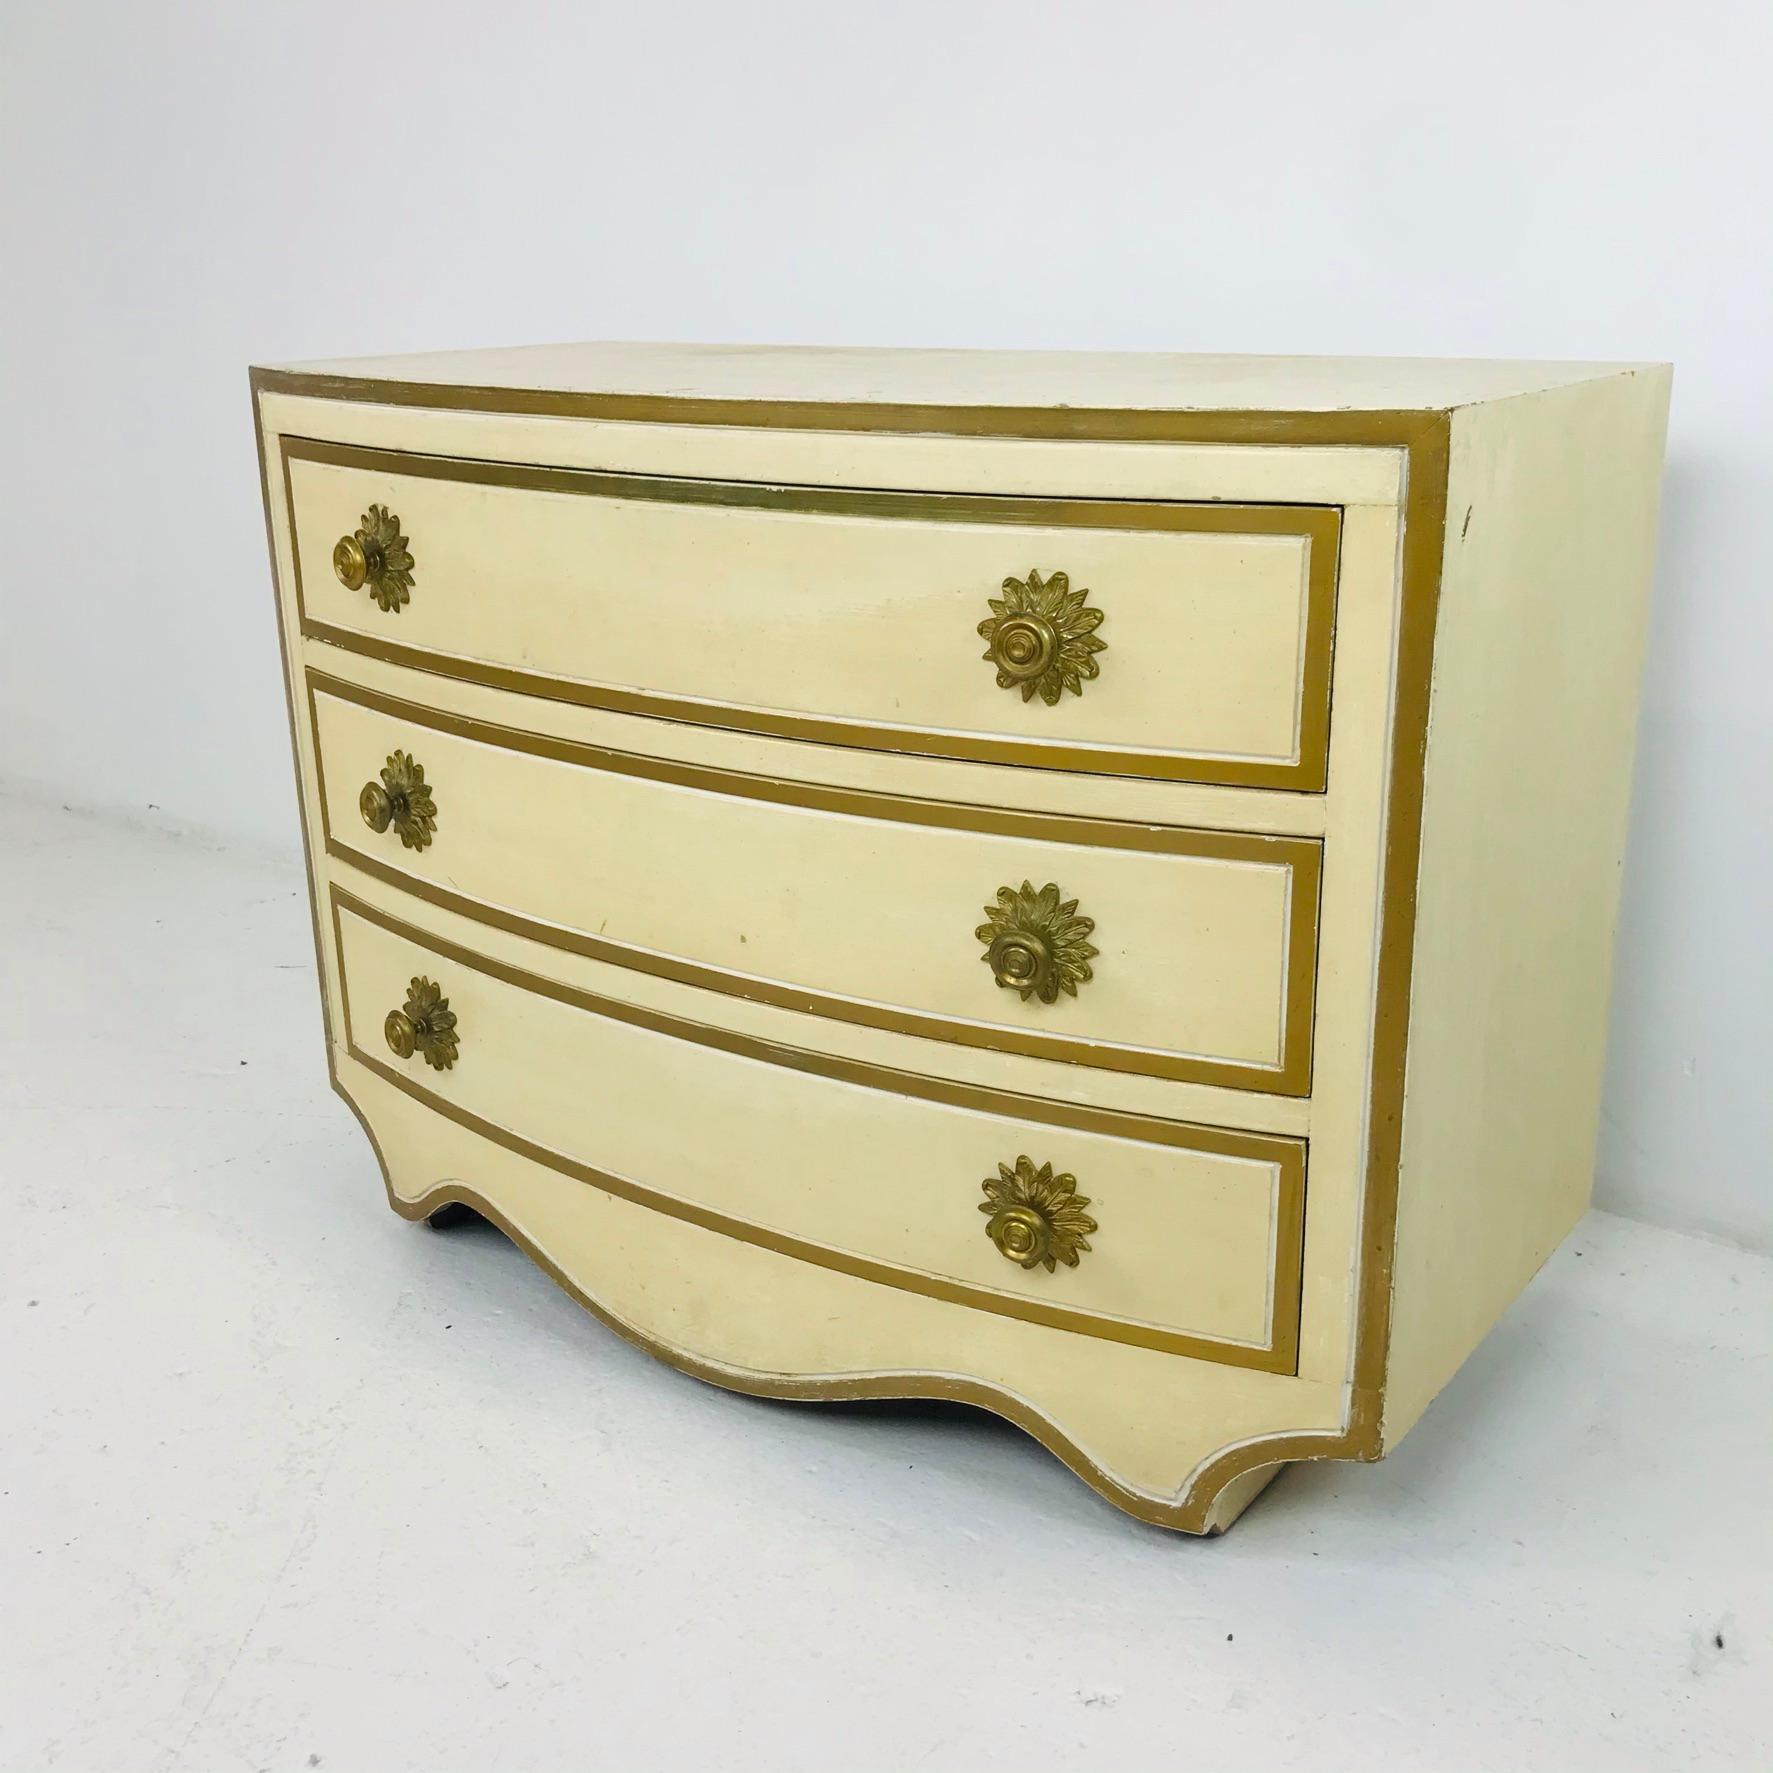 Designed by Dorothy Draper and manufactured by Henredon. This iconic chest is known for its glamorous, Hollywood Regency style. It is part of the Viennese Collection, which debuted around 1963, a couple of years before the release of her Espana